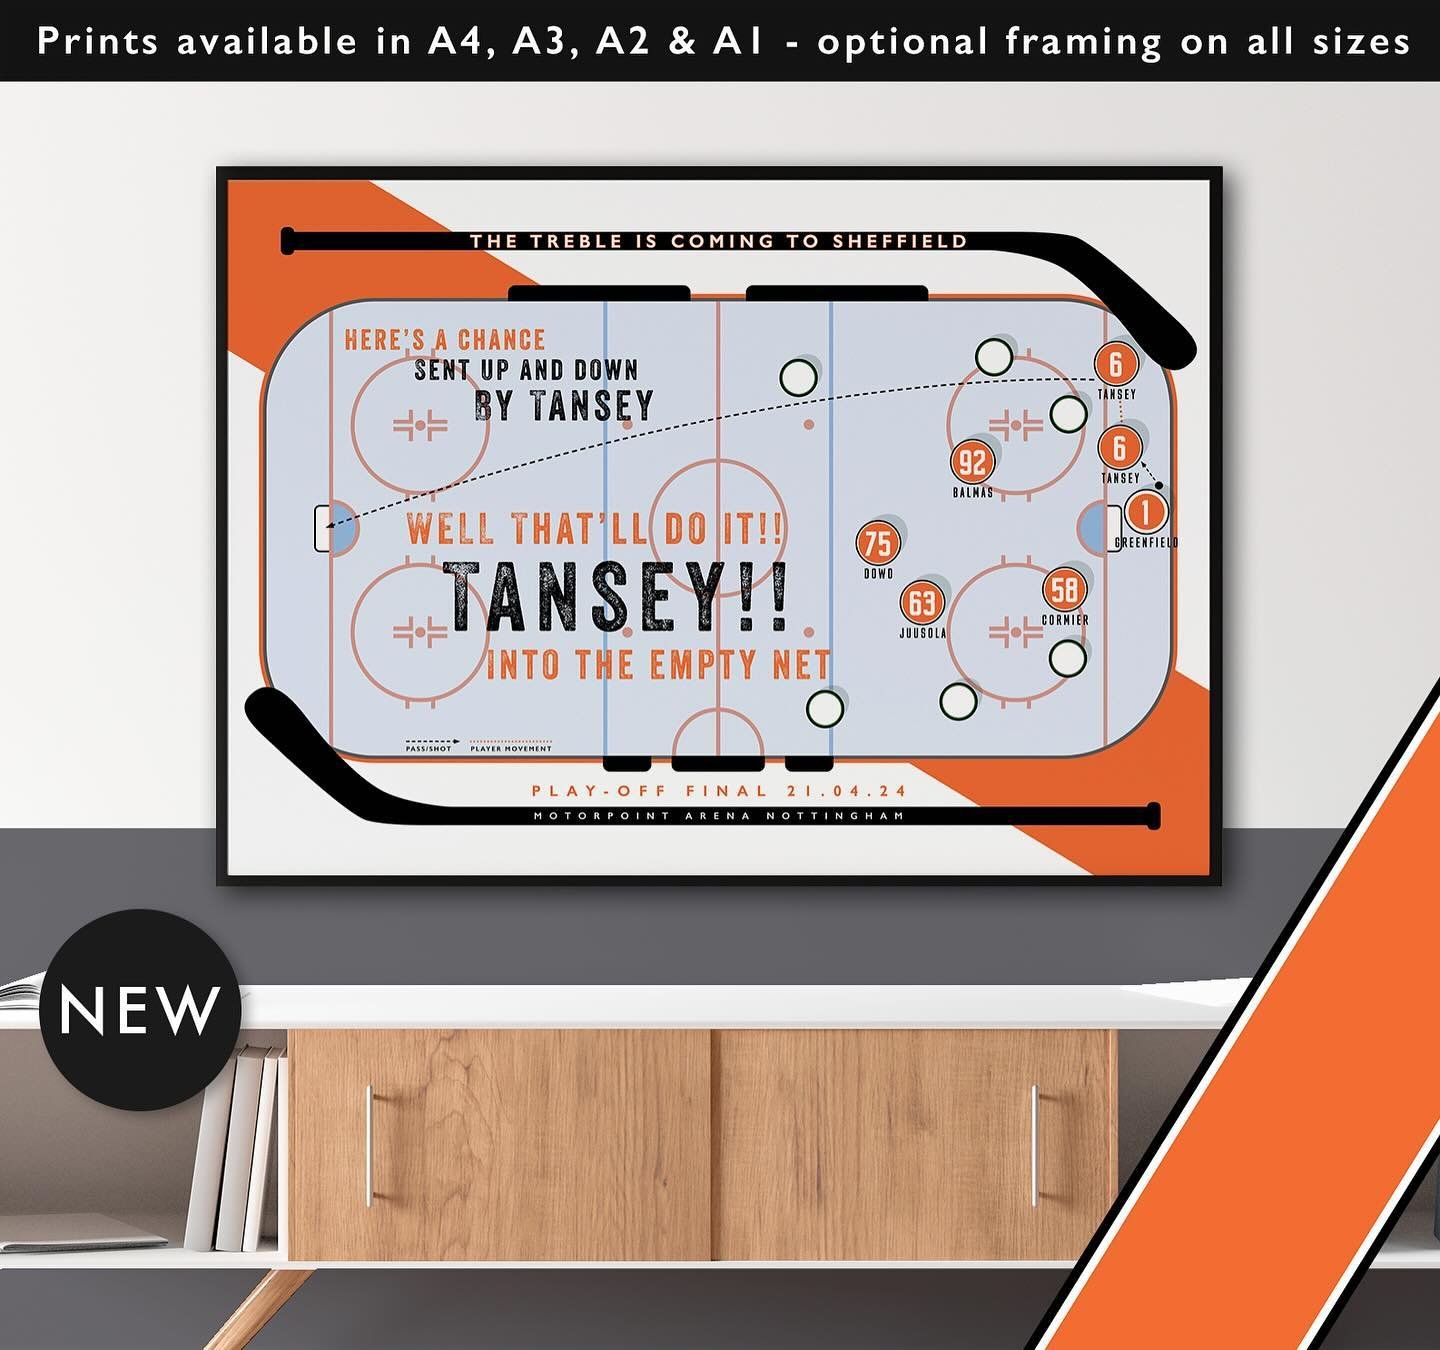 NEW: Sheffield Steelers The Tansey Goal

Prints available in A4, A3, A2 &amp; A1 with optional framing 

Get 10% off until midnight with the discount code  GRAND-SLAM 

Shop now: matthewjiwood.com/ice-hockey/she&hellip;

#SheffieldSteelers #Steelers 